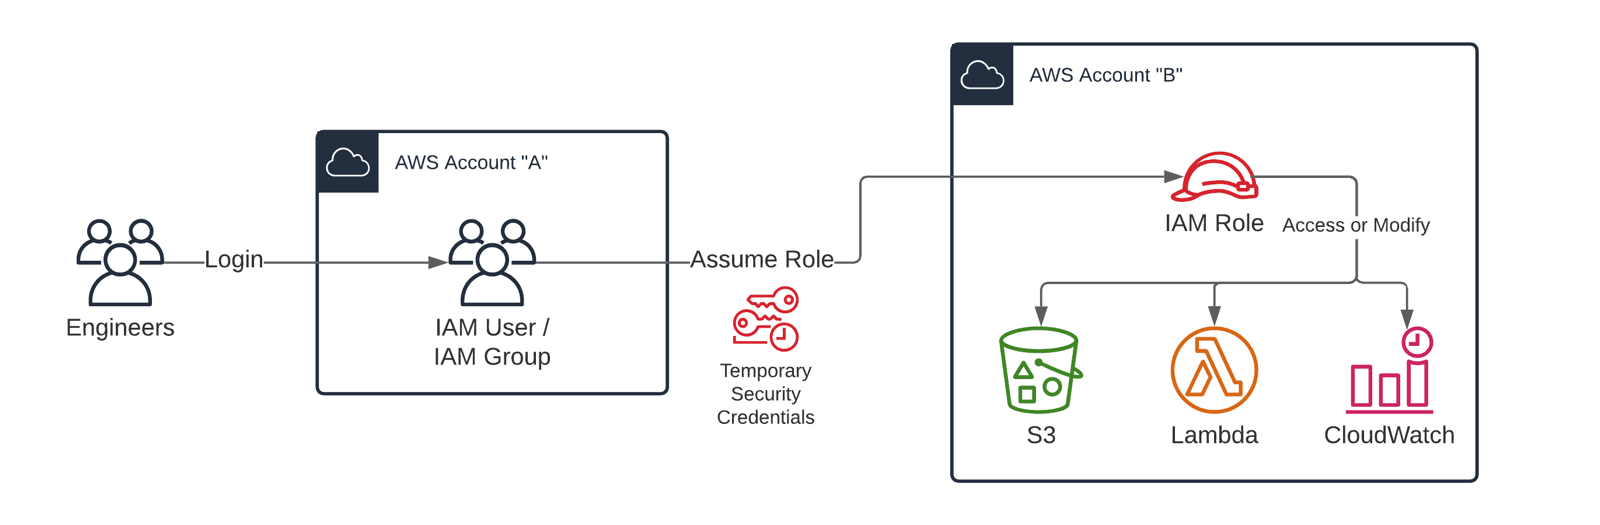 Accessing AWS accounts with IAM users and roles